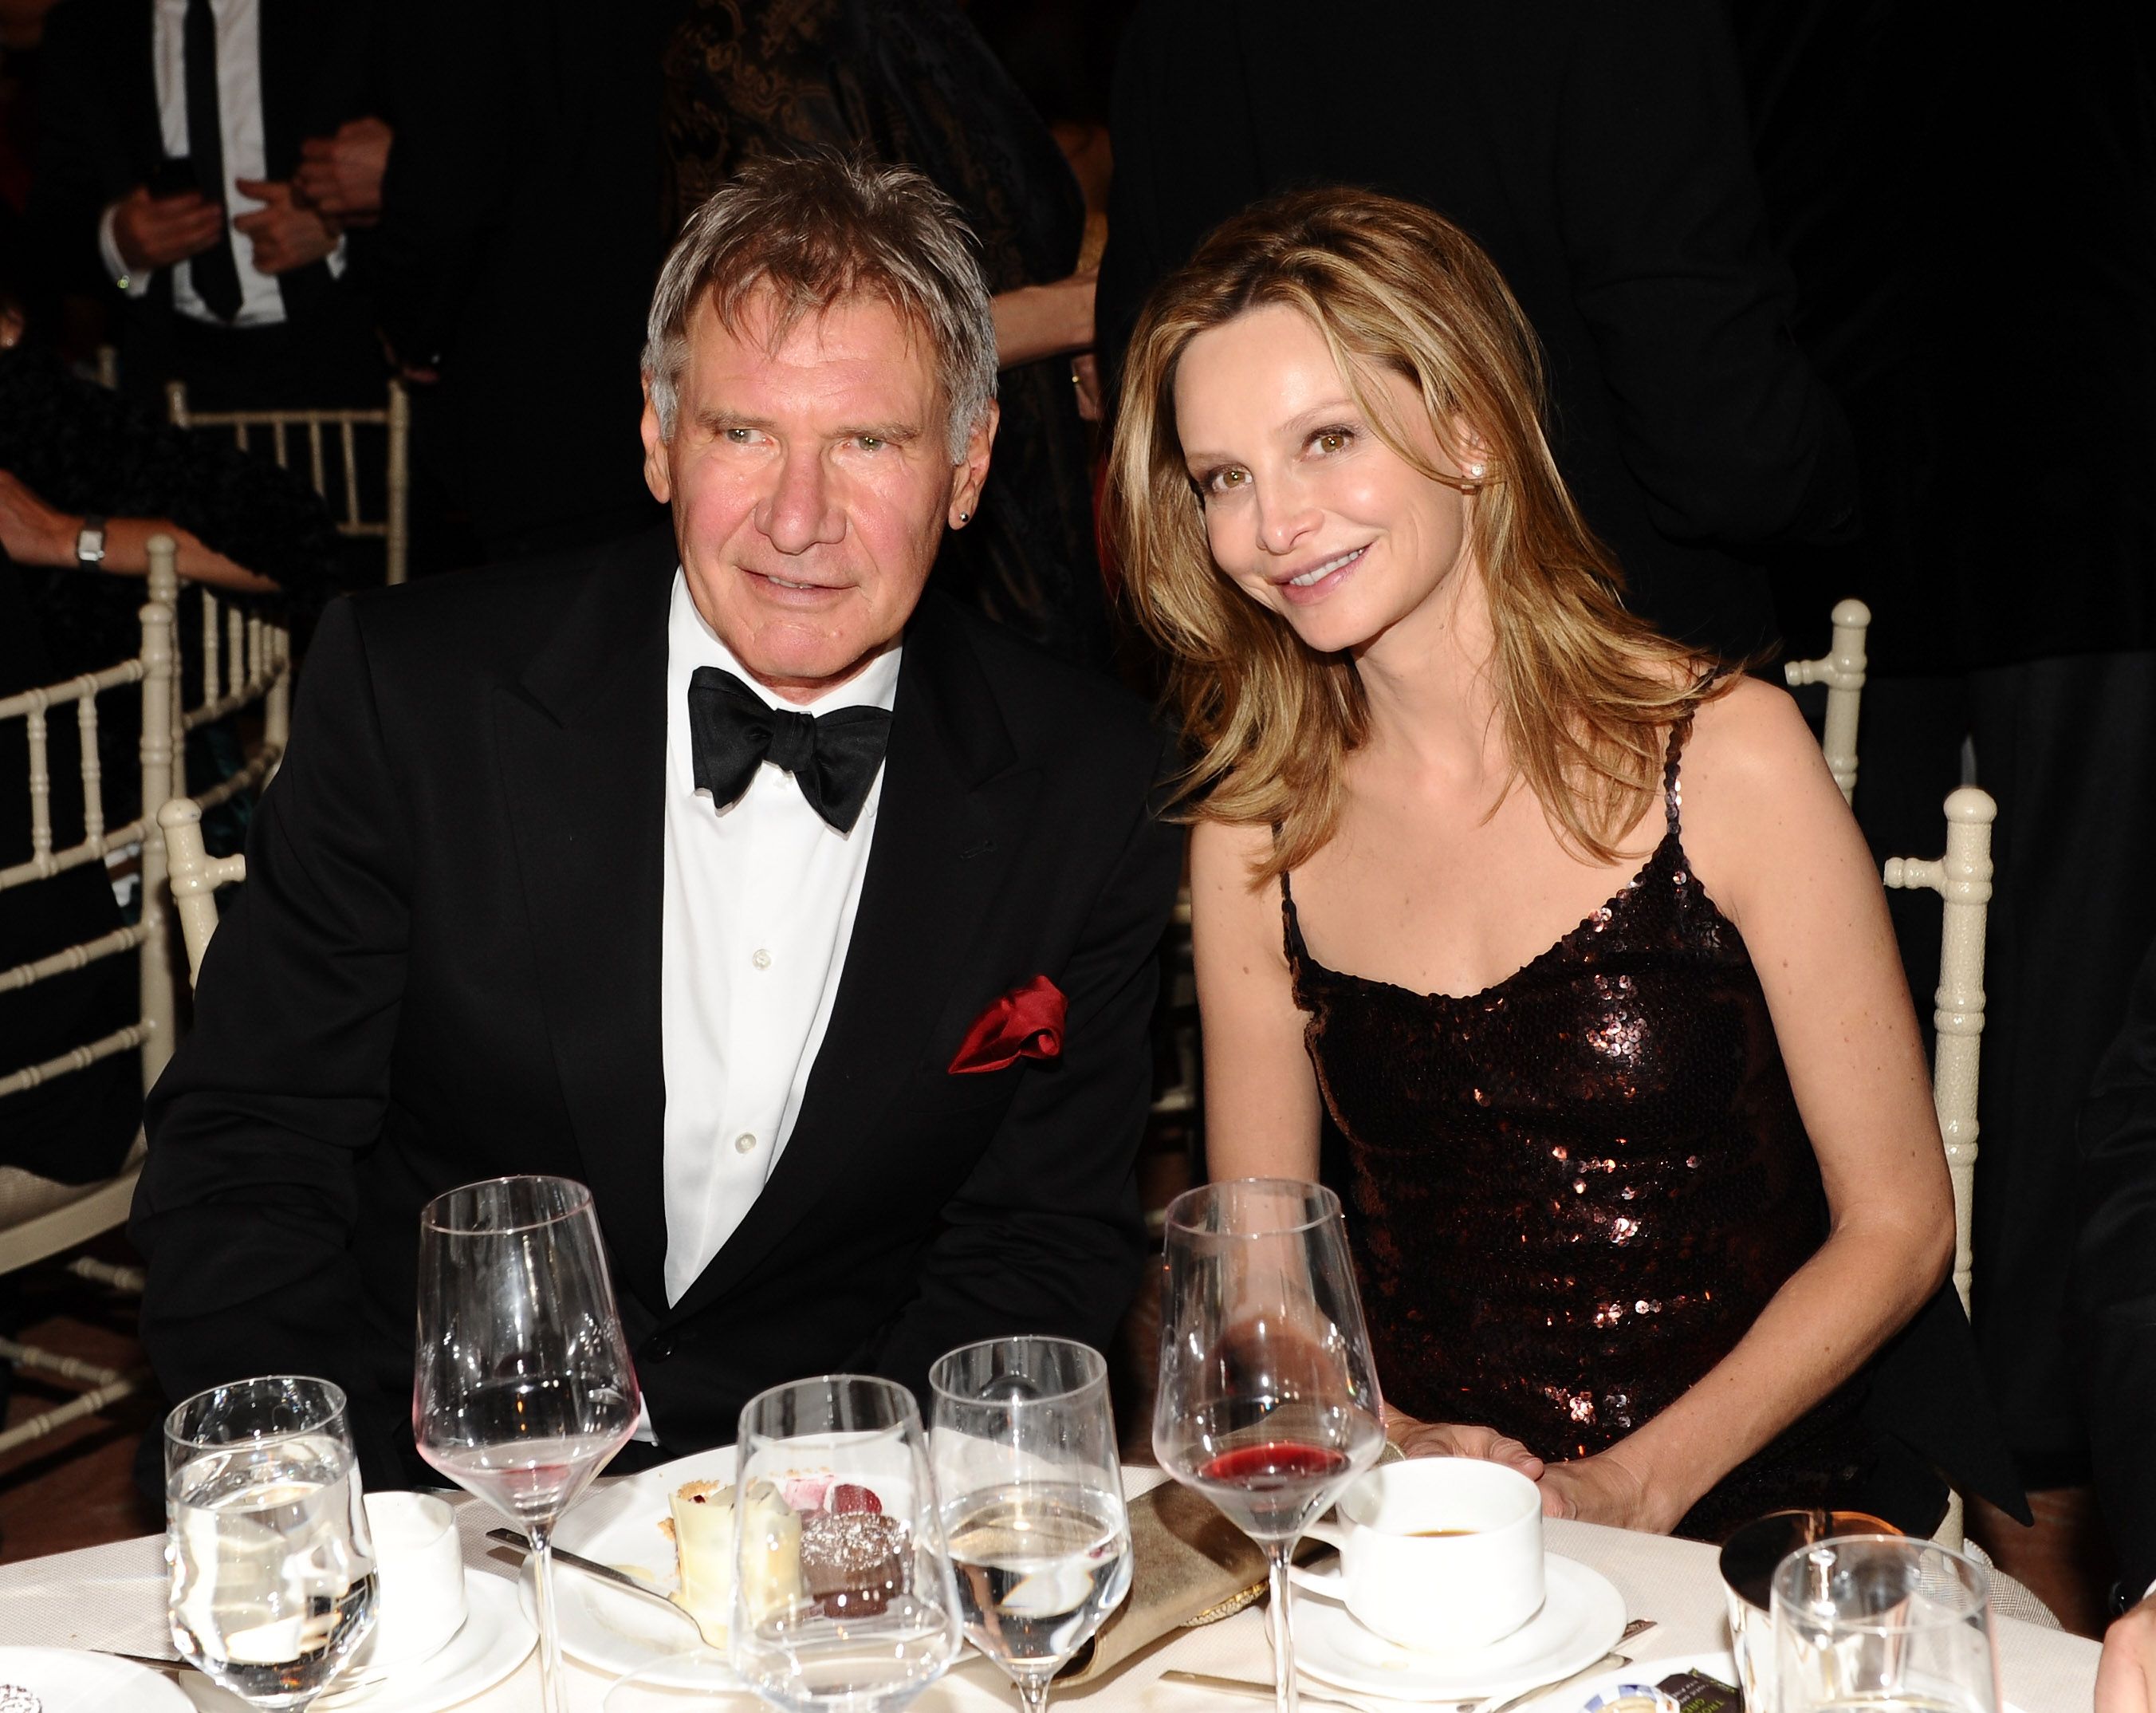 Harrison Ford and actress Calista Flockhart at the Santa Barbara International Film Festival's 5th Annual Kirk Douglas' Excellence In Film Awards in 2010.